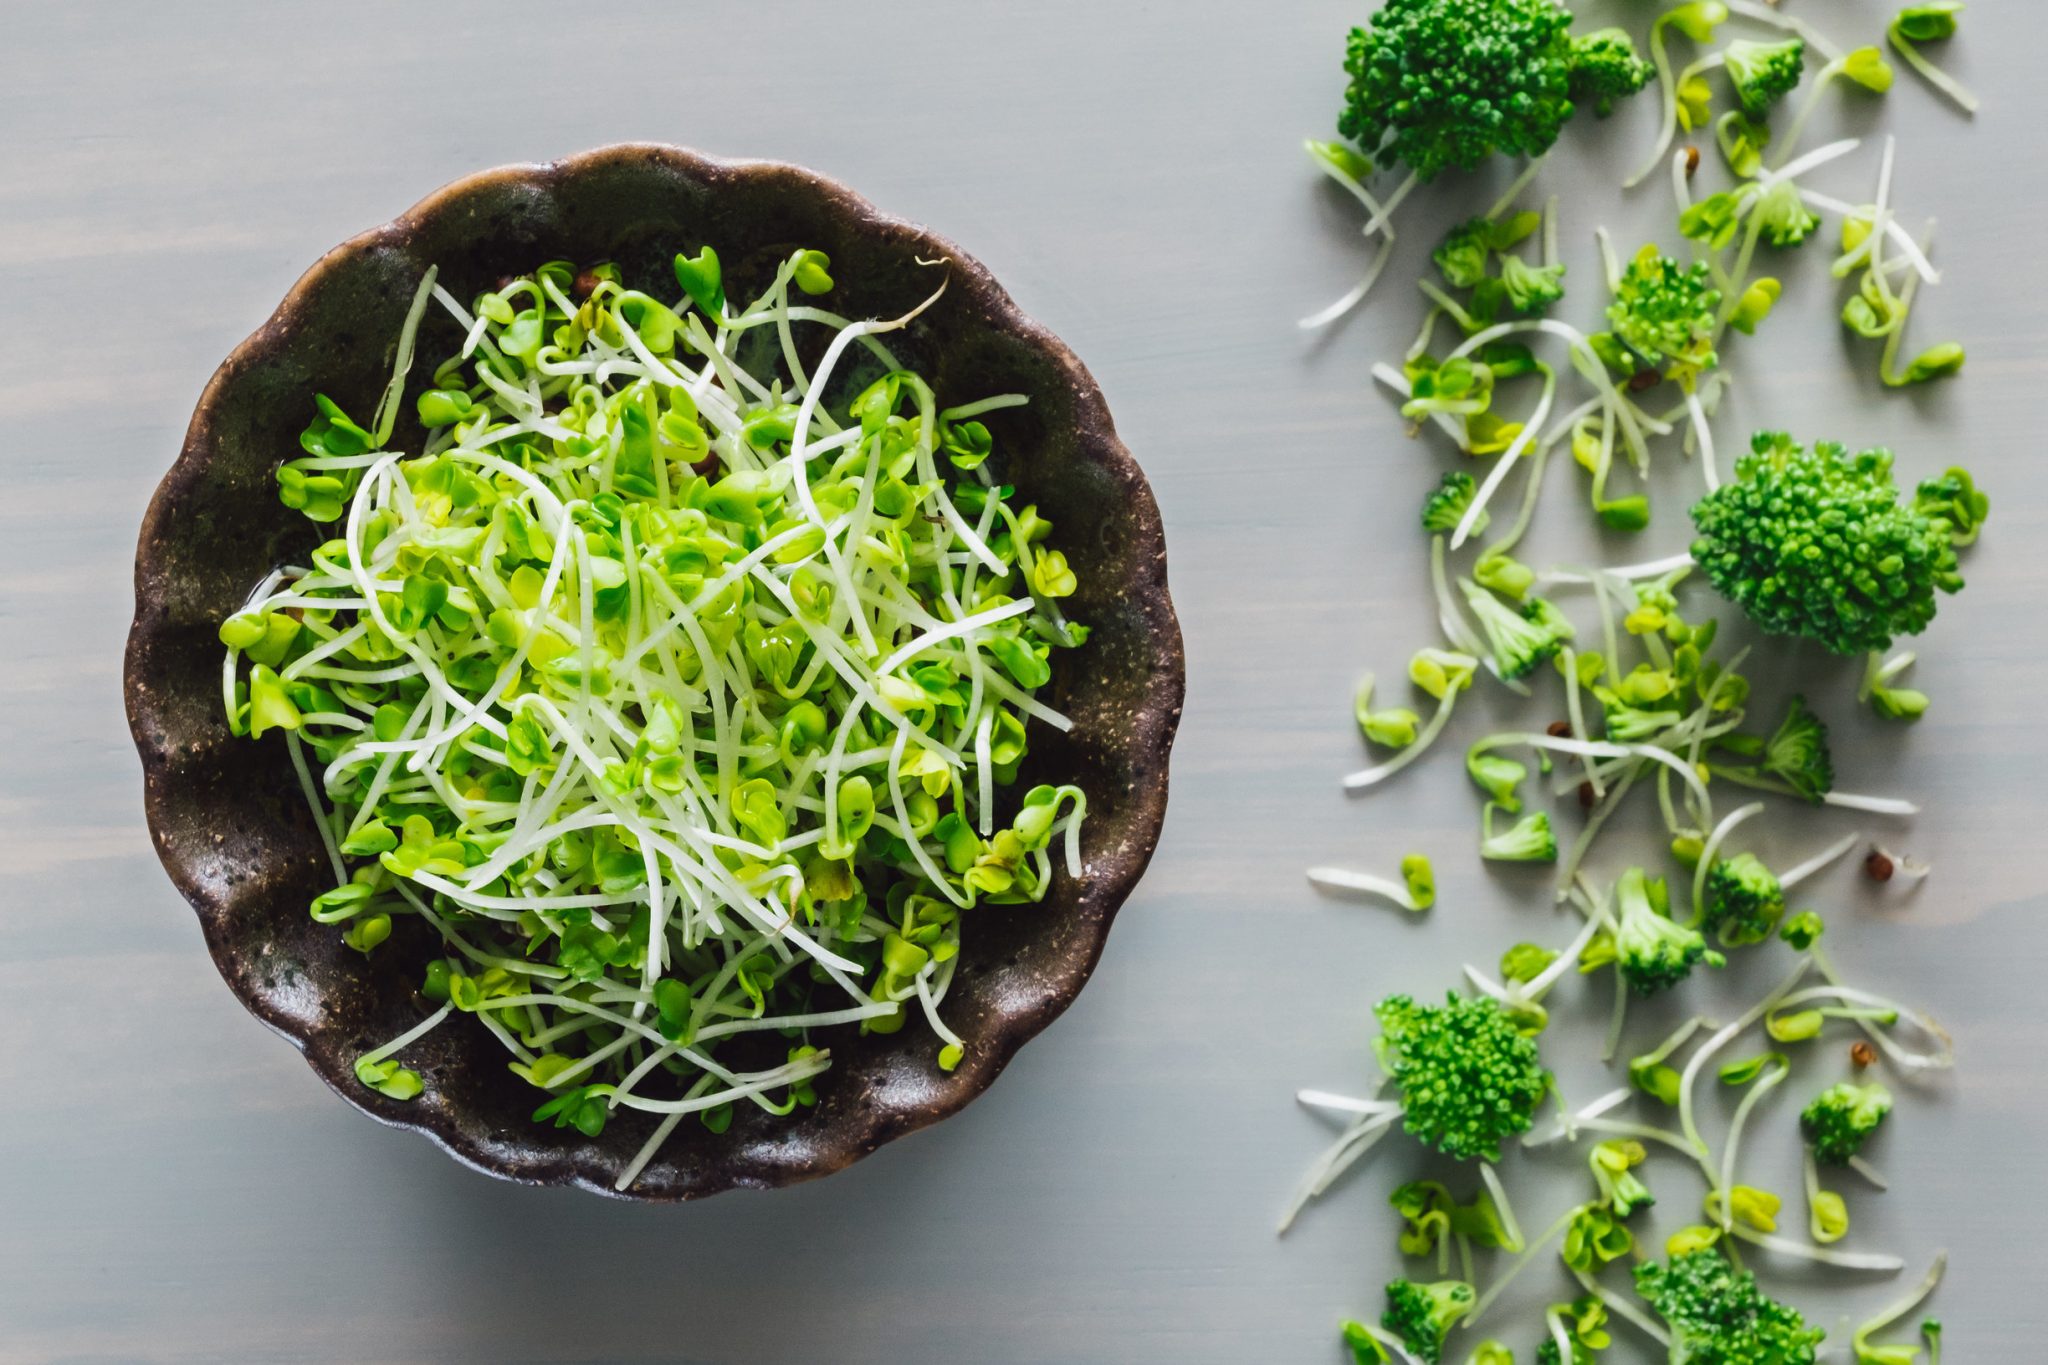 Broccoli Sprouts to Reduce Inflammation